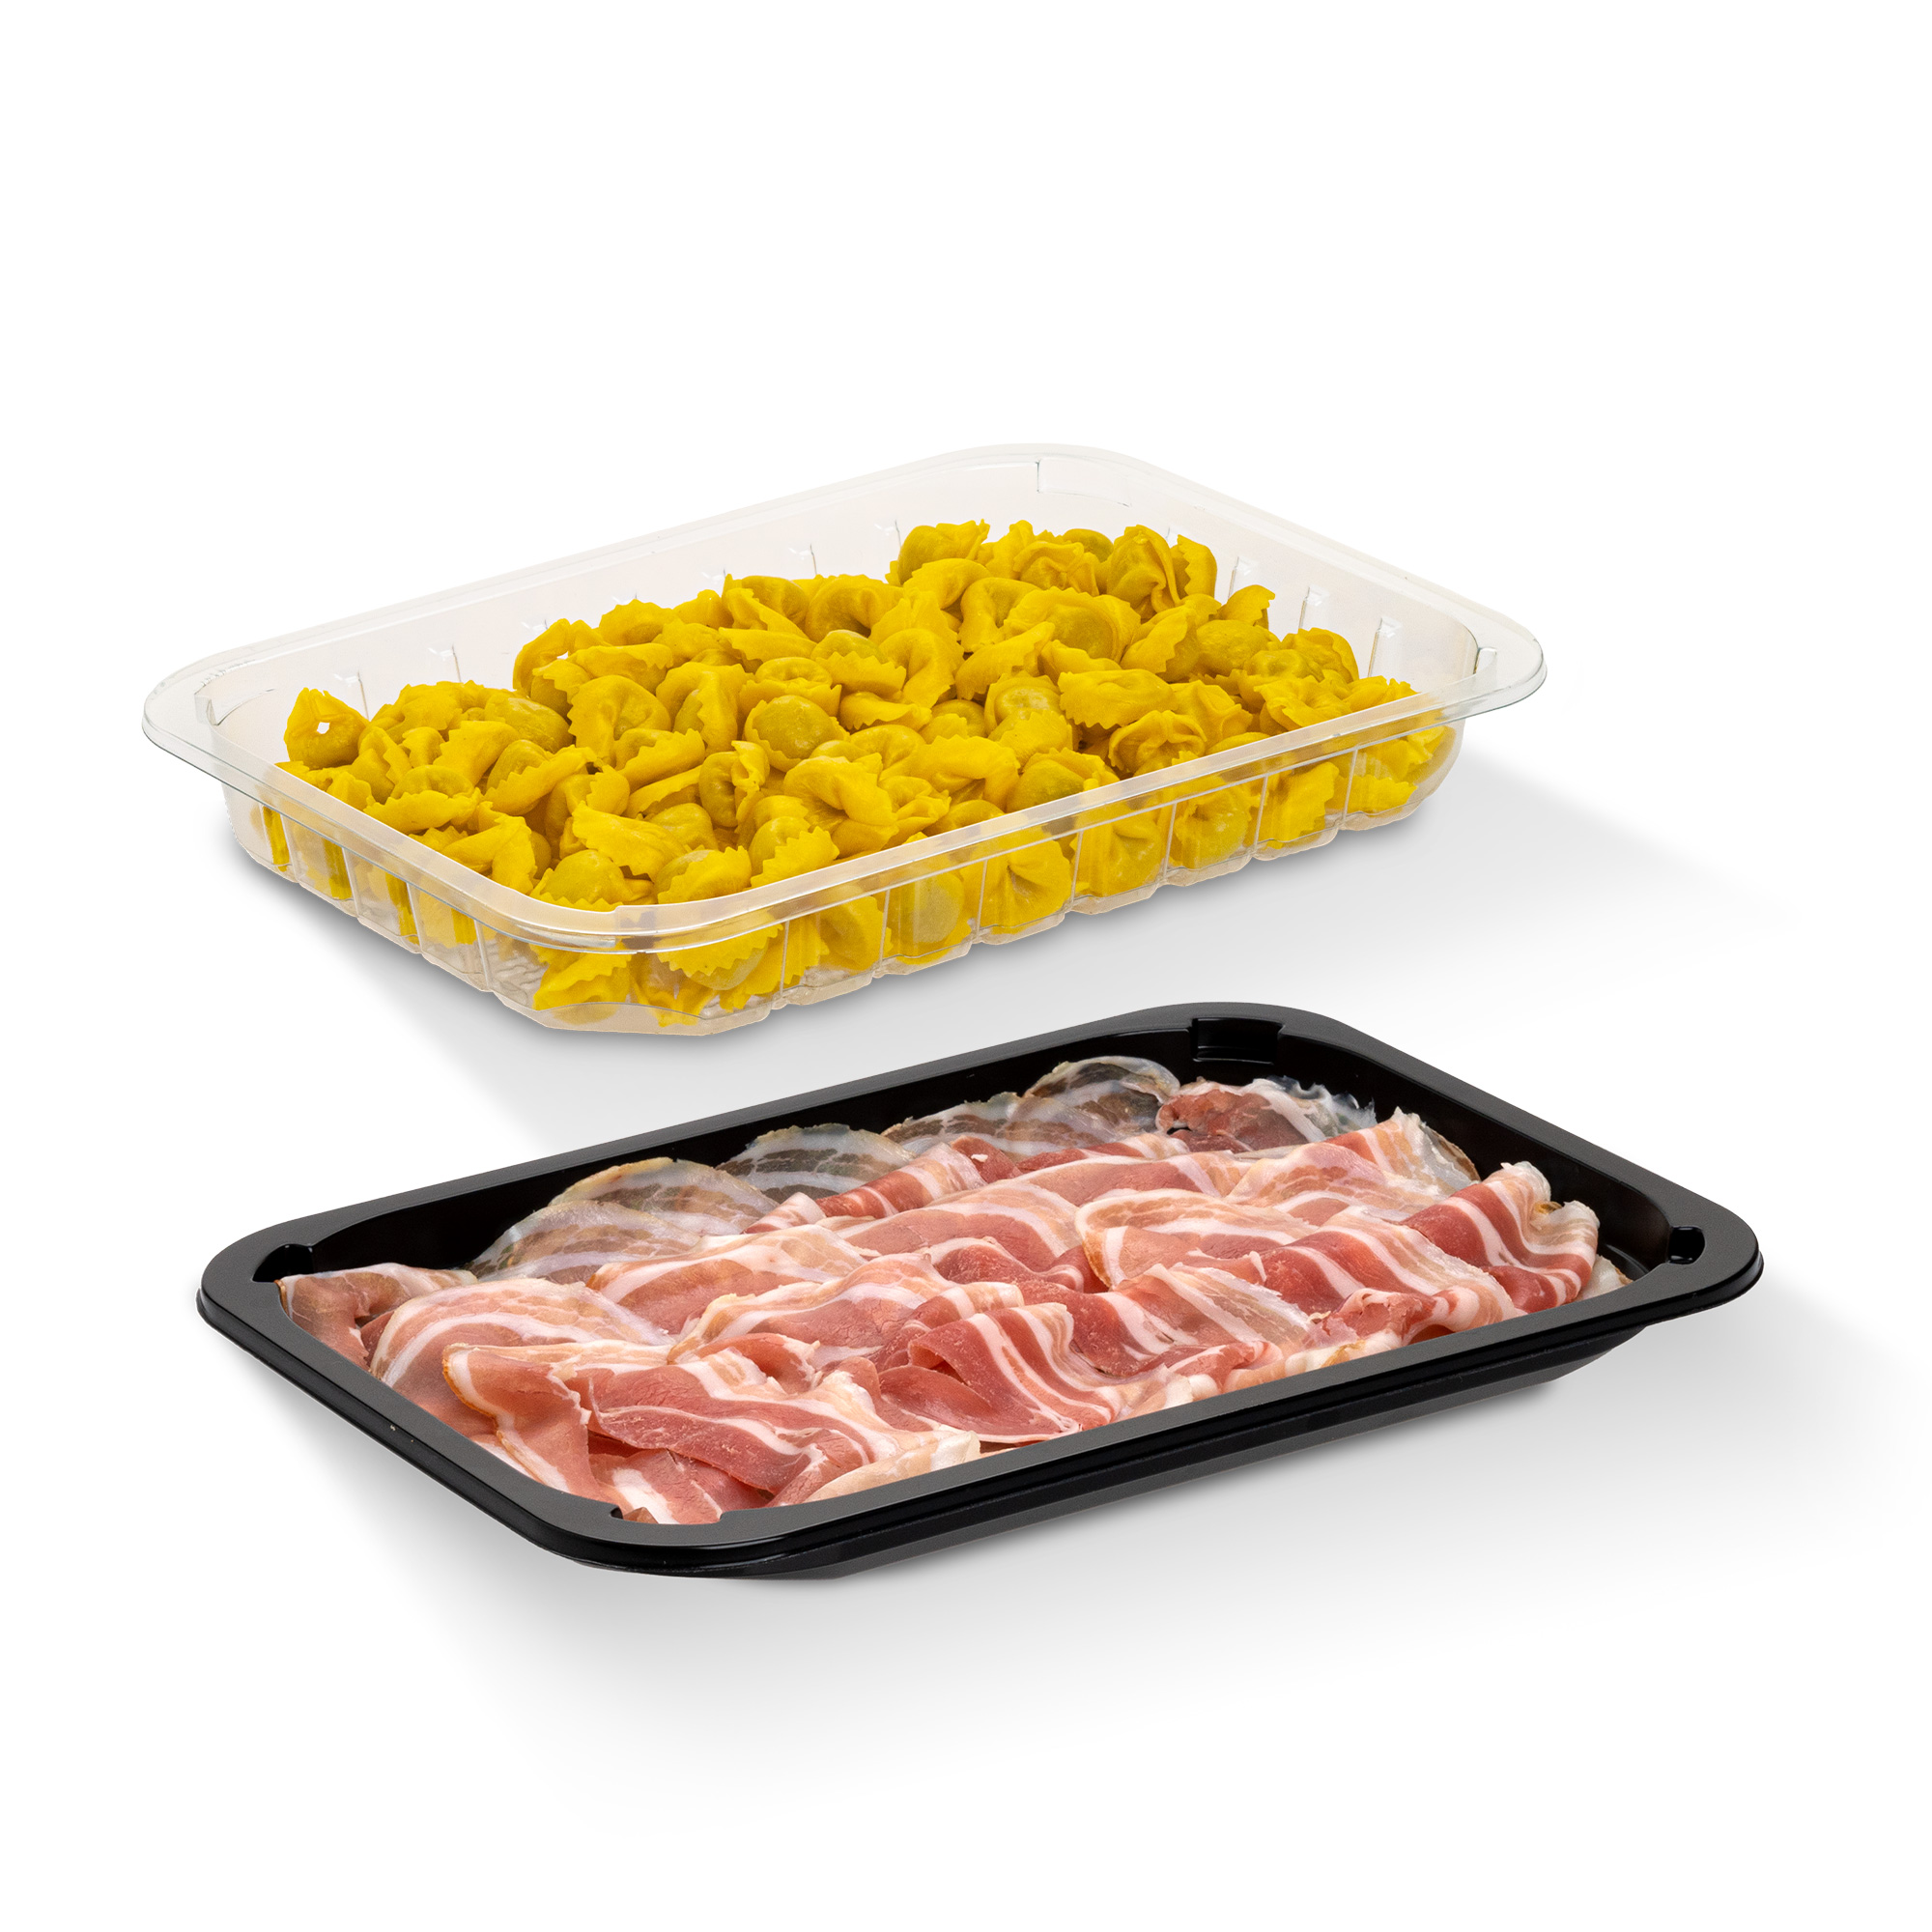 Fresh and sliced pasta in trays